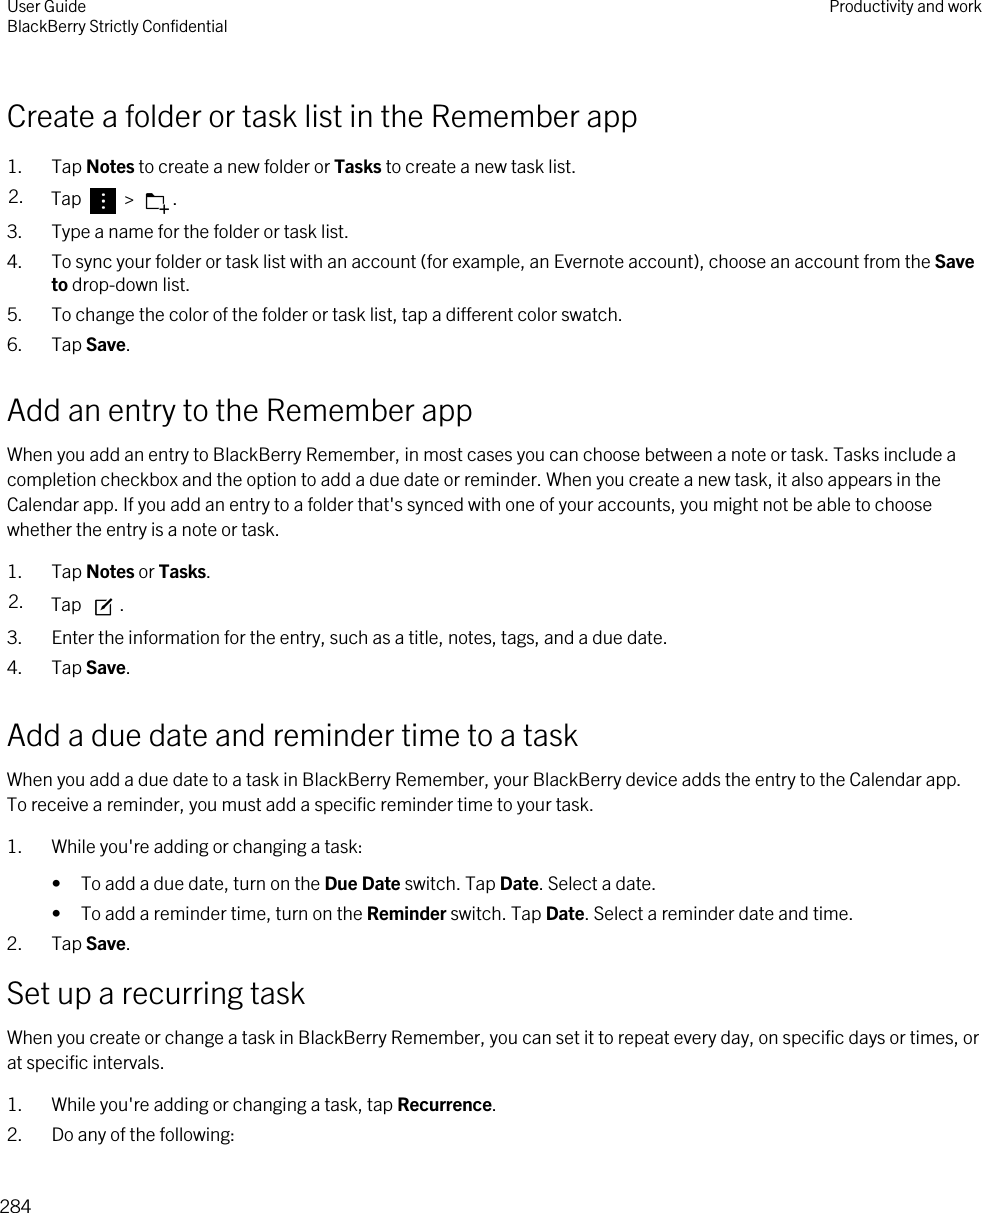 Create a folder or task list in the Remember app1. Tap Notes to create a new folder or Tasks to create a new task list.2. Tap   &gt;  .3. Type a name for the folder or task list.4. To sync your folder or task list with an account (for example, an Evernote account), choose an account from the Save to drop-down list.5. To change the color of the folder or task list, tap a different color swatch.6. Tap Save.Add an entry to the Remember appWhen you add an entry to BlackBerry Remember, in most cases you can choose between a note or task. Tasks include a completion checkbox and the option to add a due date or reminder. When you create a new task, it also appears in the Calendar app. If you add an entry to a folder that&apos;s synced with one of your accounts, you might not be able to choose whether the entry is a note or task.1. Tap Notes or Tasks.2. Tap  .3. Enter the information for the entry, such as a title, notes, tags, and a due date.4. Tap Save.Add a due date and reminder time to a taskWhen you add a due date to a task in BlackBerry Remember, your BlackBerry device adds the entry to the Calendar app. To receive a reminder, you must add a specific reminder time to your task.1. While you&apos;re adding or changing a task:• To add a due date, turn on the Due Date switch. Tap Date. Select a date.• To add a reminder time, turn on the Reminder switch. Tap Date. Select a reminder date and time.2. Tap Save.Set up a recurring taskWhen you create or change a task in BlackBerry Remember, you can set it to repeat every day, on specific days or times, or at specific intervals.1. While you&apos;re adding or changing a task, tap Recurrence.2. Do any of the following:User GuideBlackBerry Strictly Confidential Productivity and work284